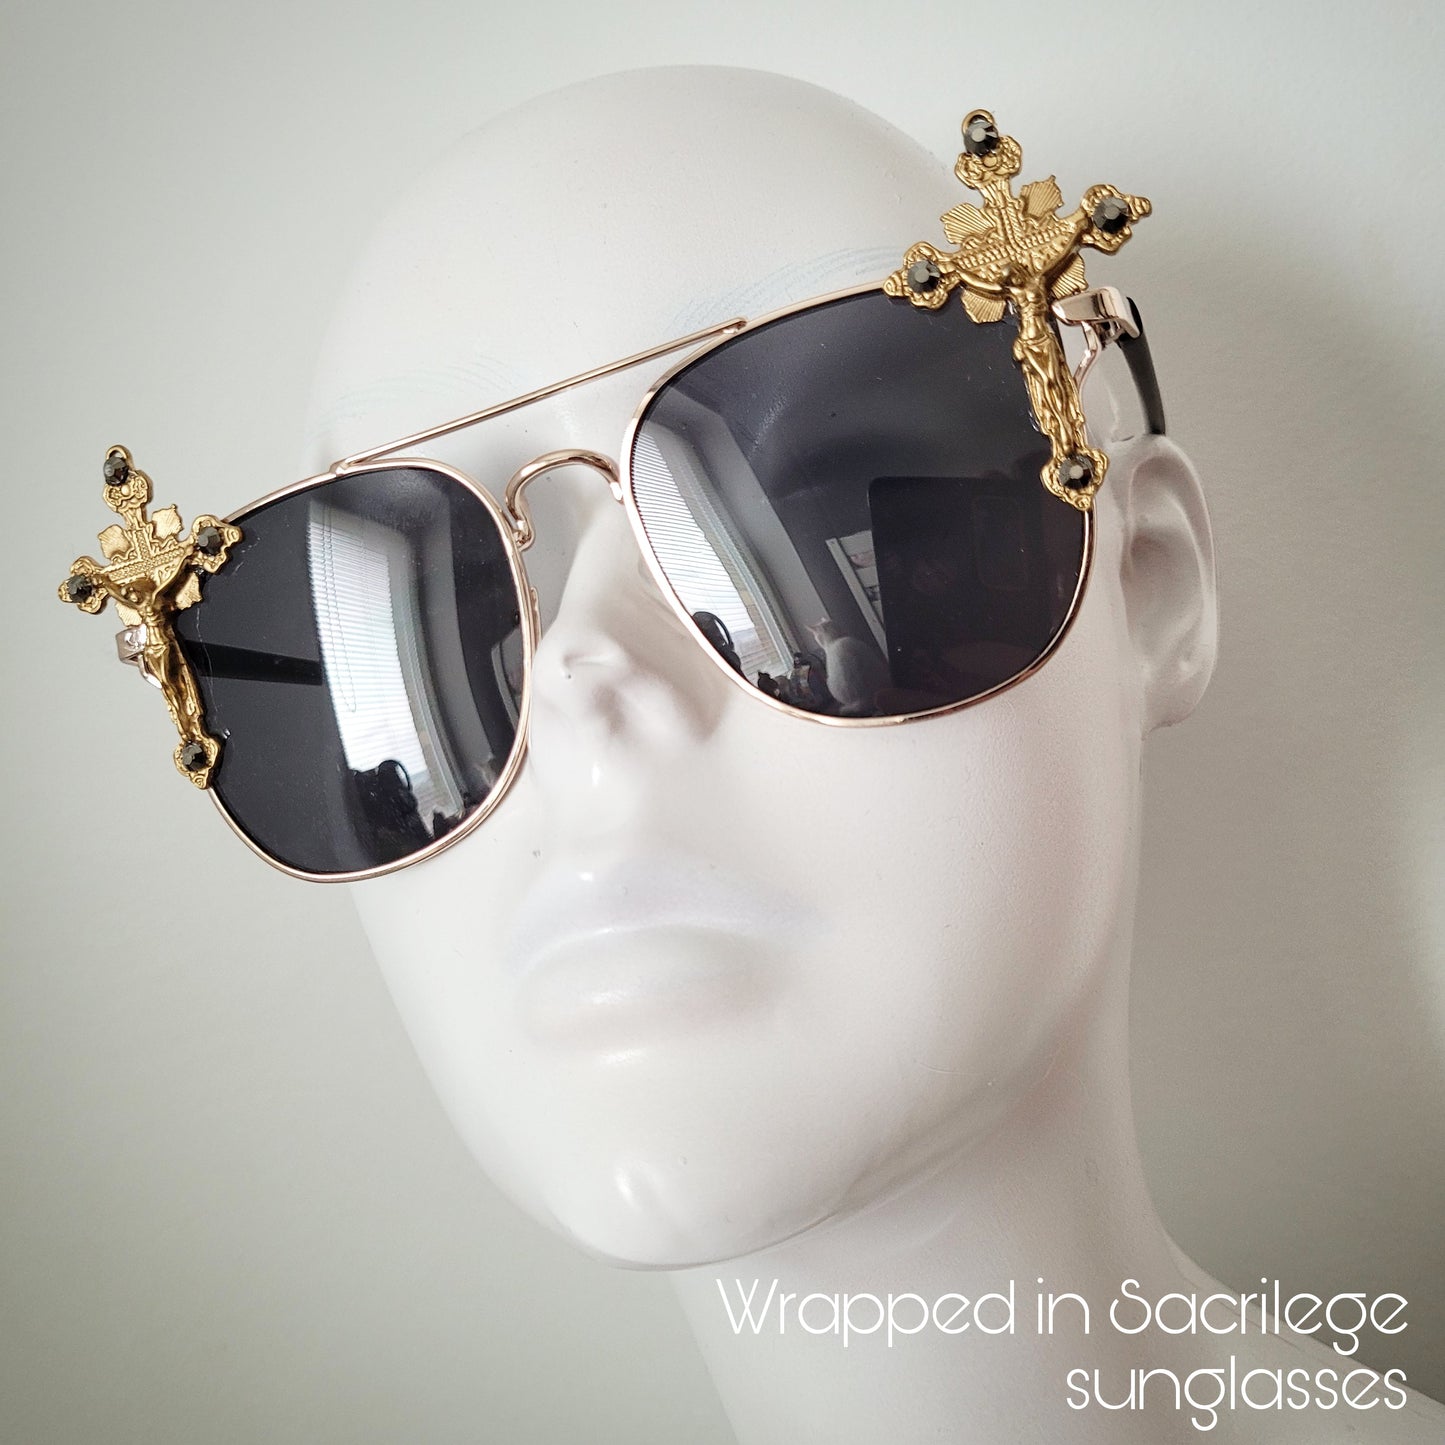 Sacrilegious Collection: The Wrapped in Sacrilege sunglasses, limited edition